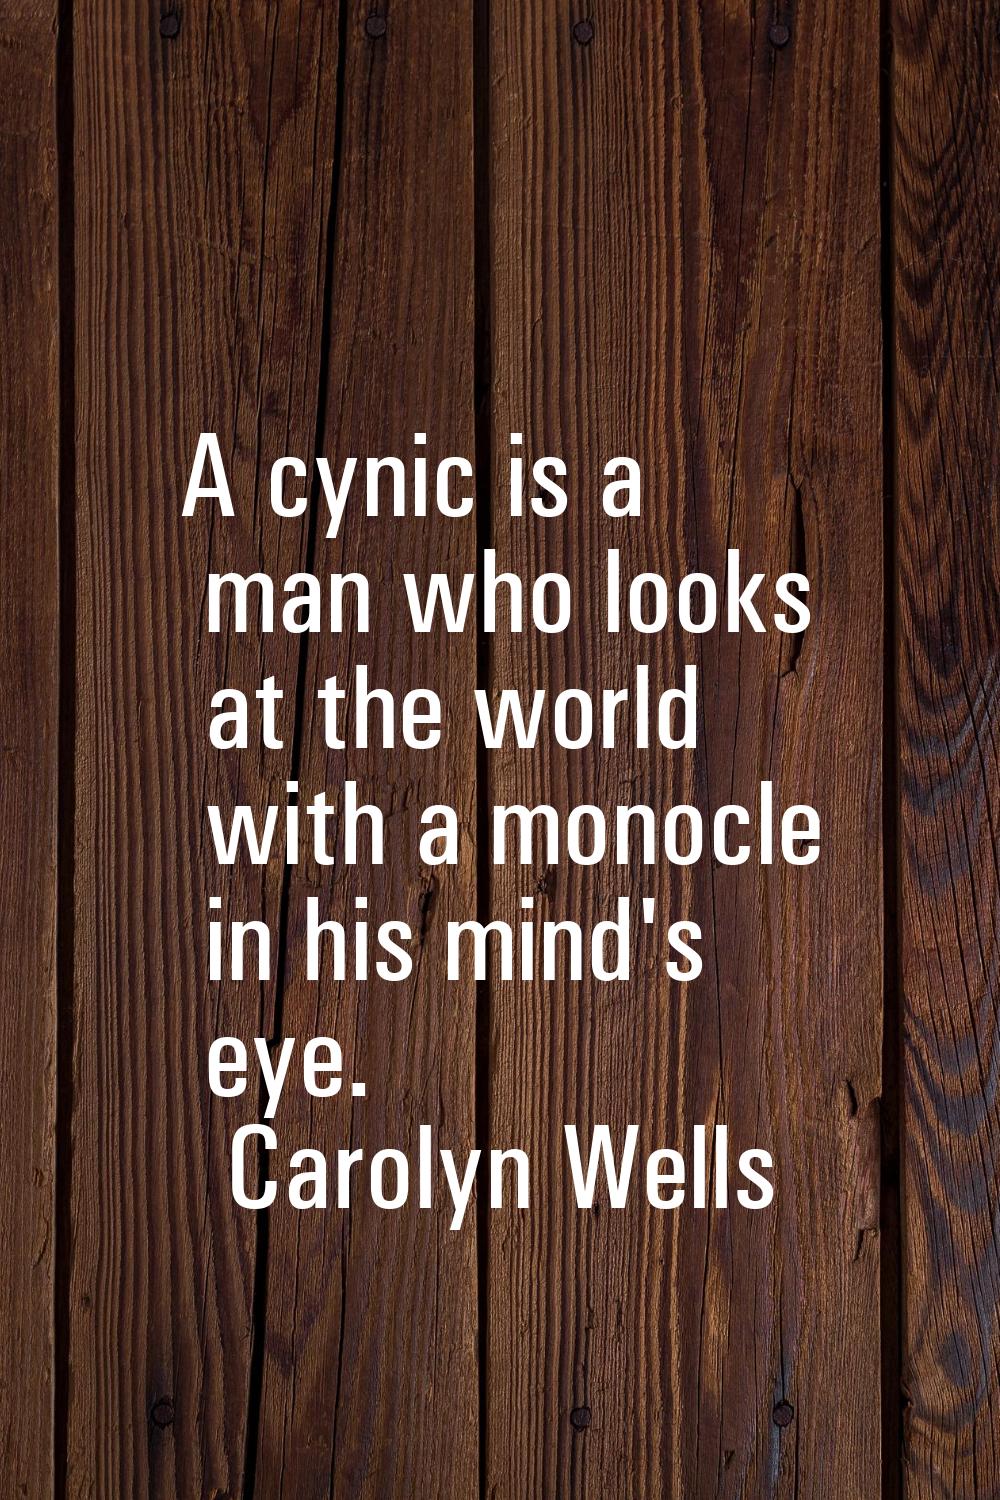 A cynic is a man who looks at the world with a monocle in his mind's eye.